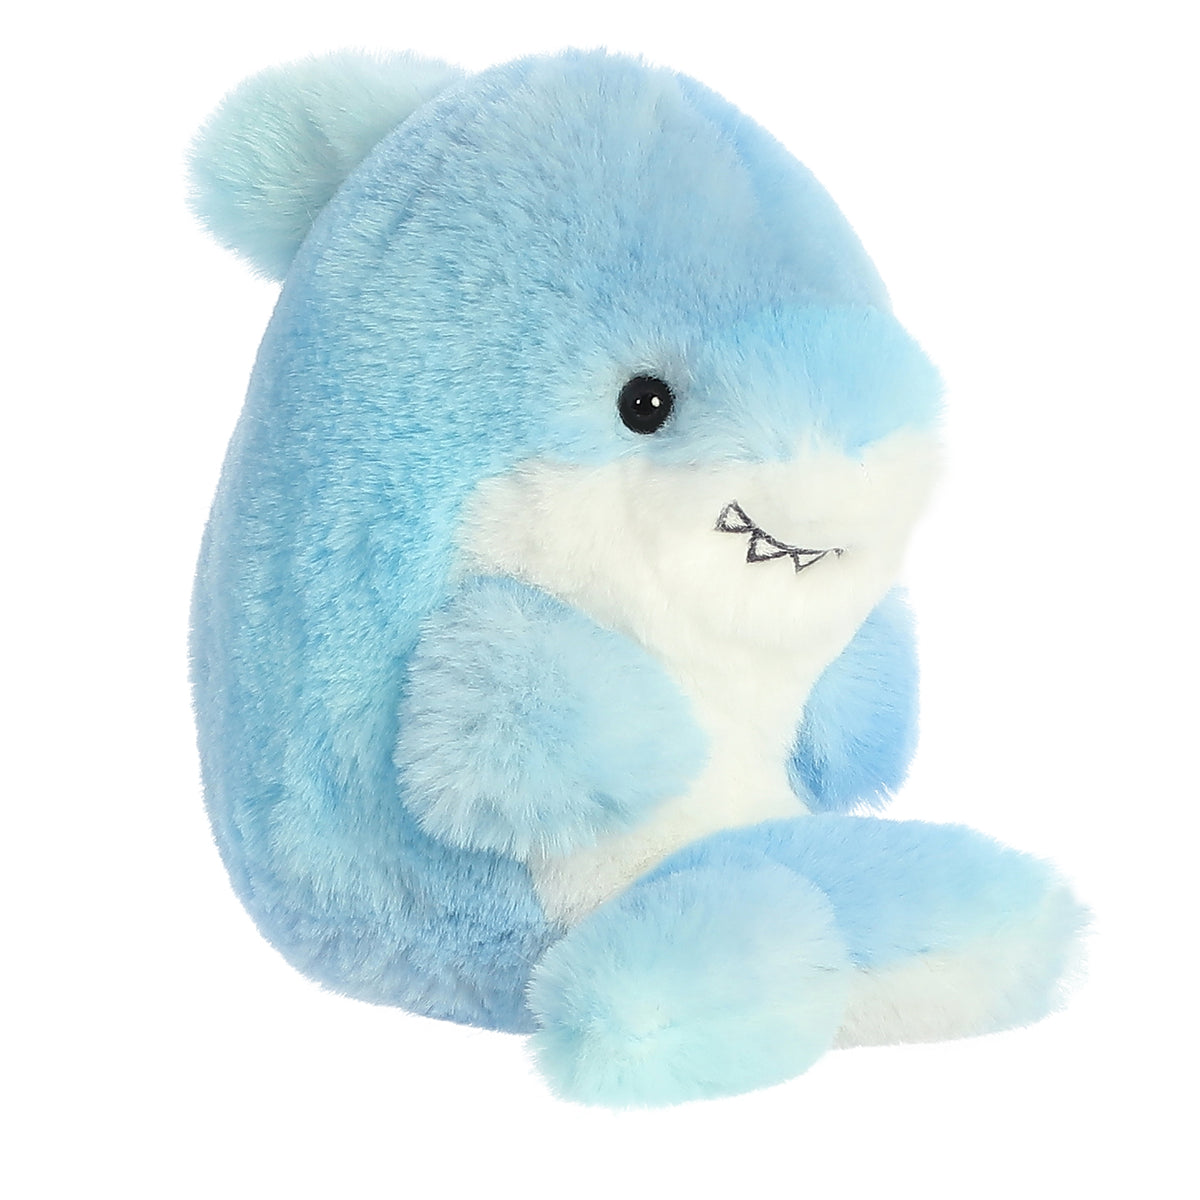 Shark plush, baby blue with a white belly, exudes playfulness with a wide, infectious smile, arms tucked and legs aimed up!